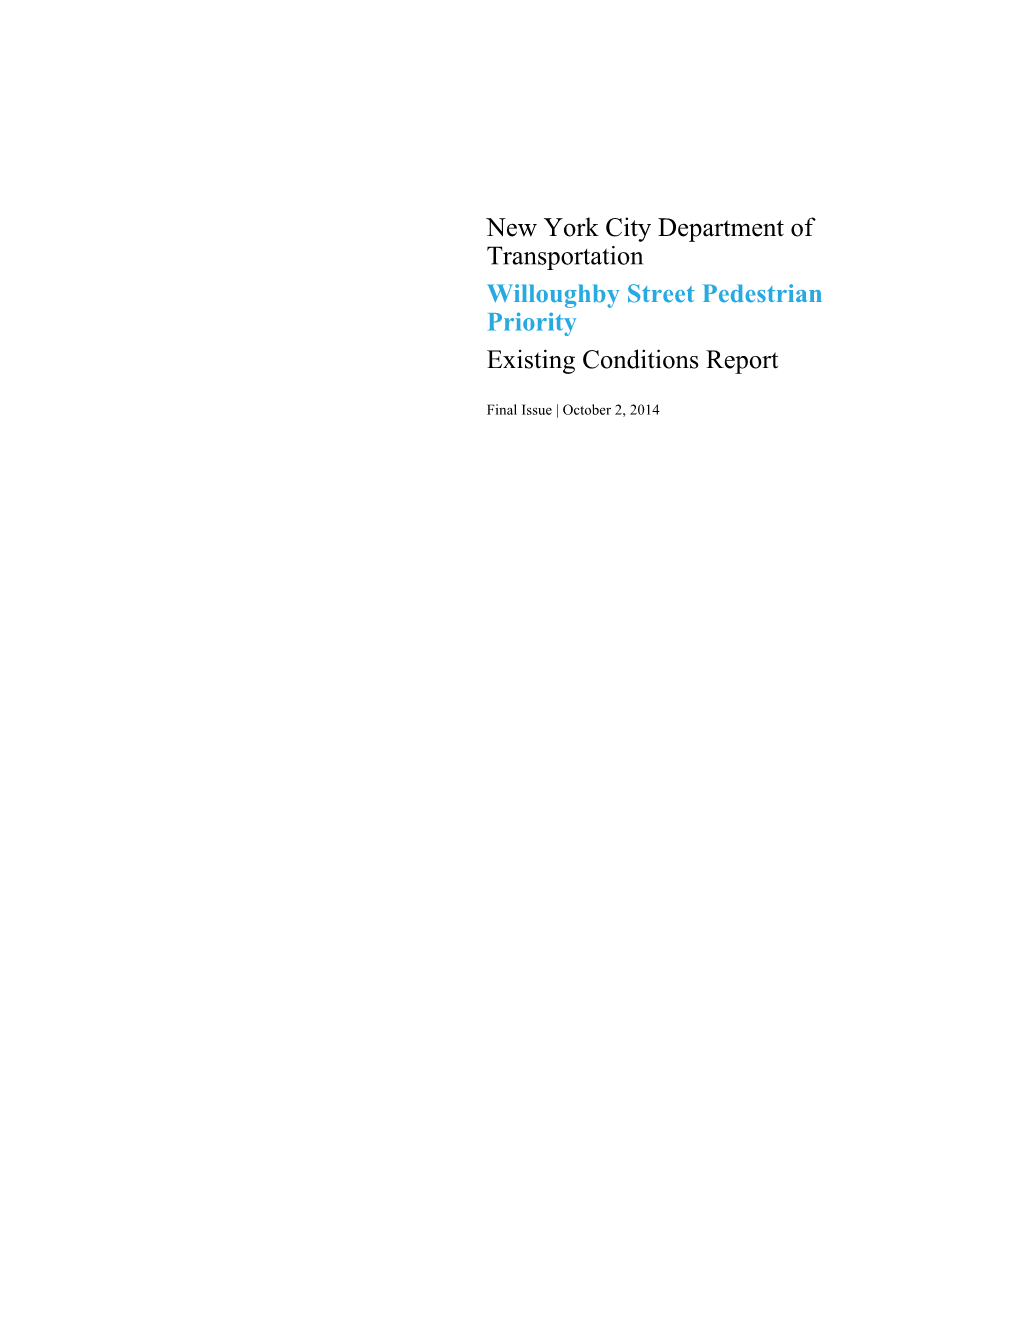 New York City Department of Transportation Willoughby Street Pedestrian Priority Existing Conditions Report